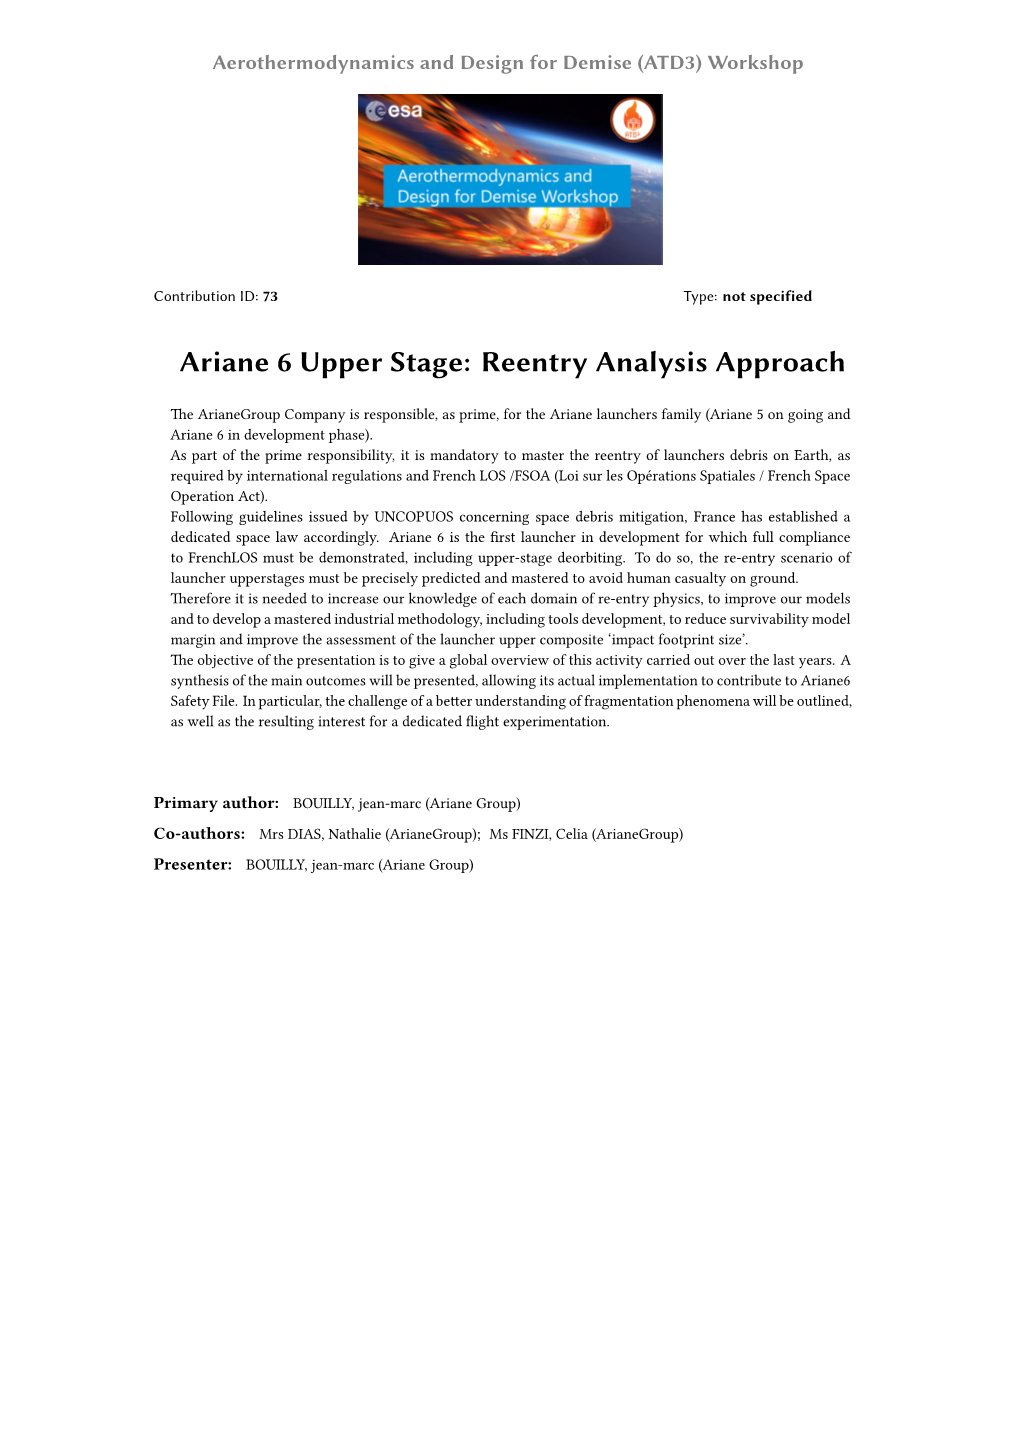 Ariane 6 Upper Stage: Reentry Analysis Approach